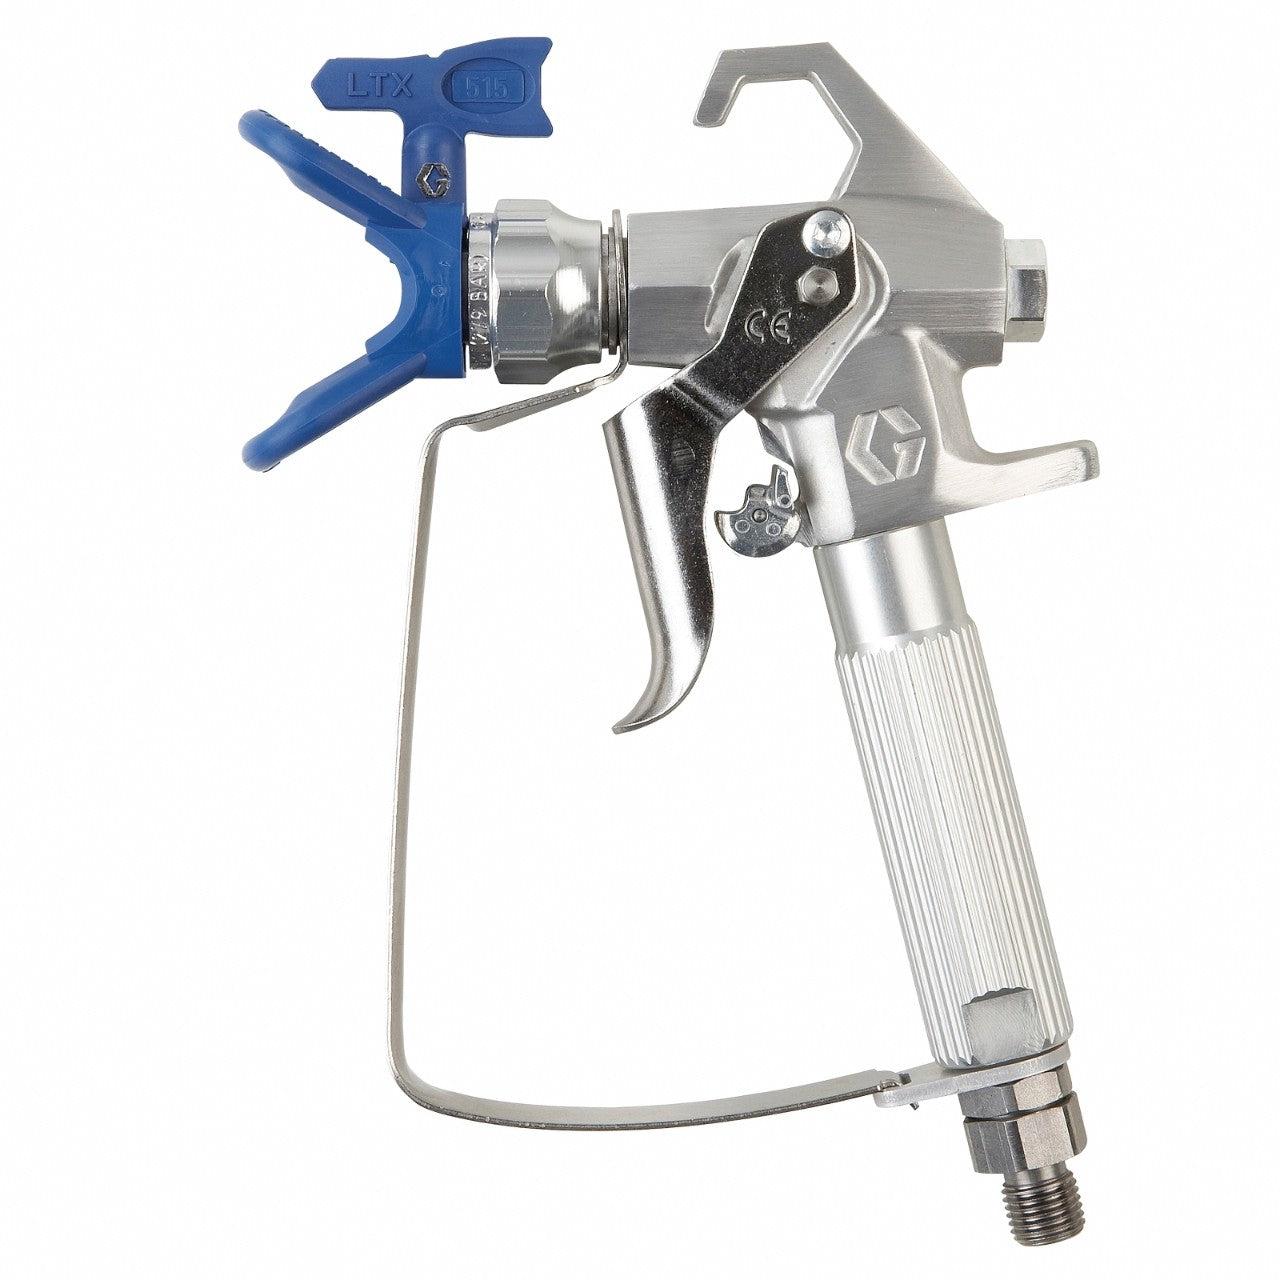 Contractor FTx Airless Spray Gun, 2 Finger Trigger, RAC X 515 SwitchTip